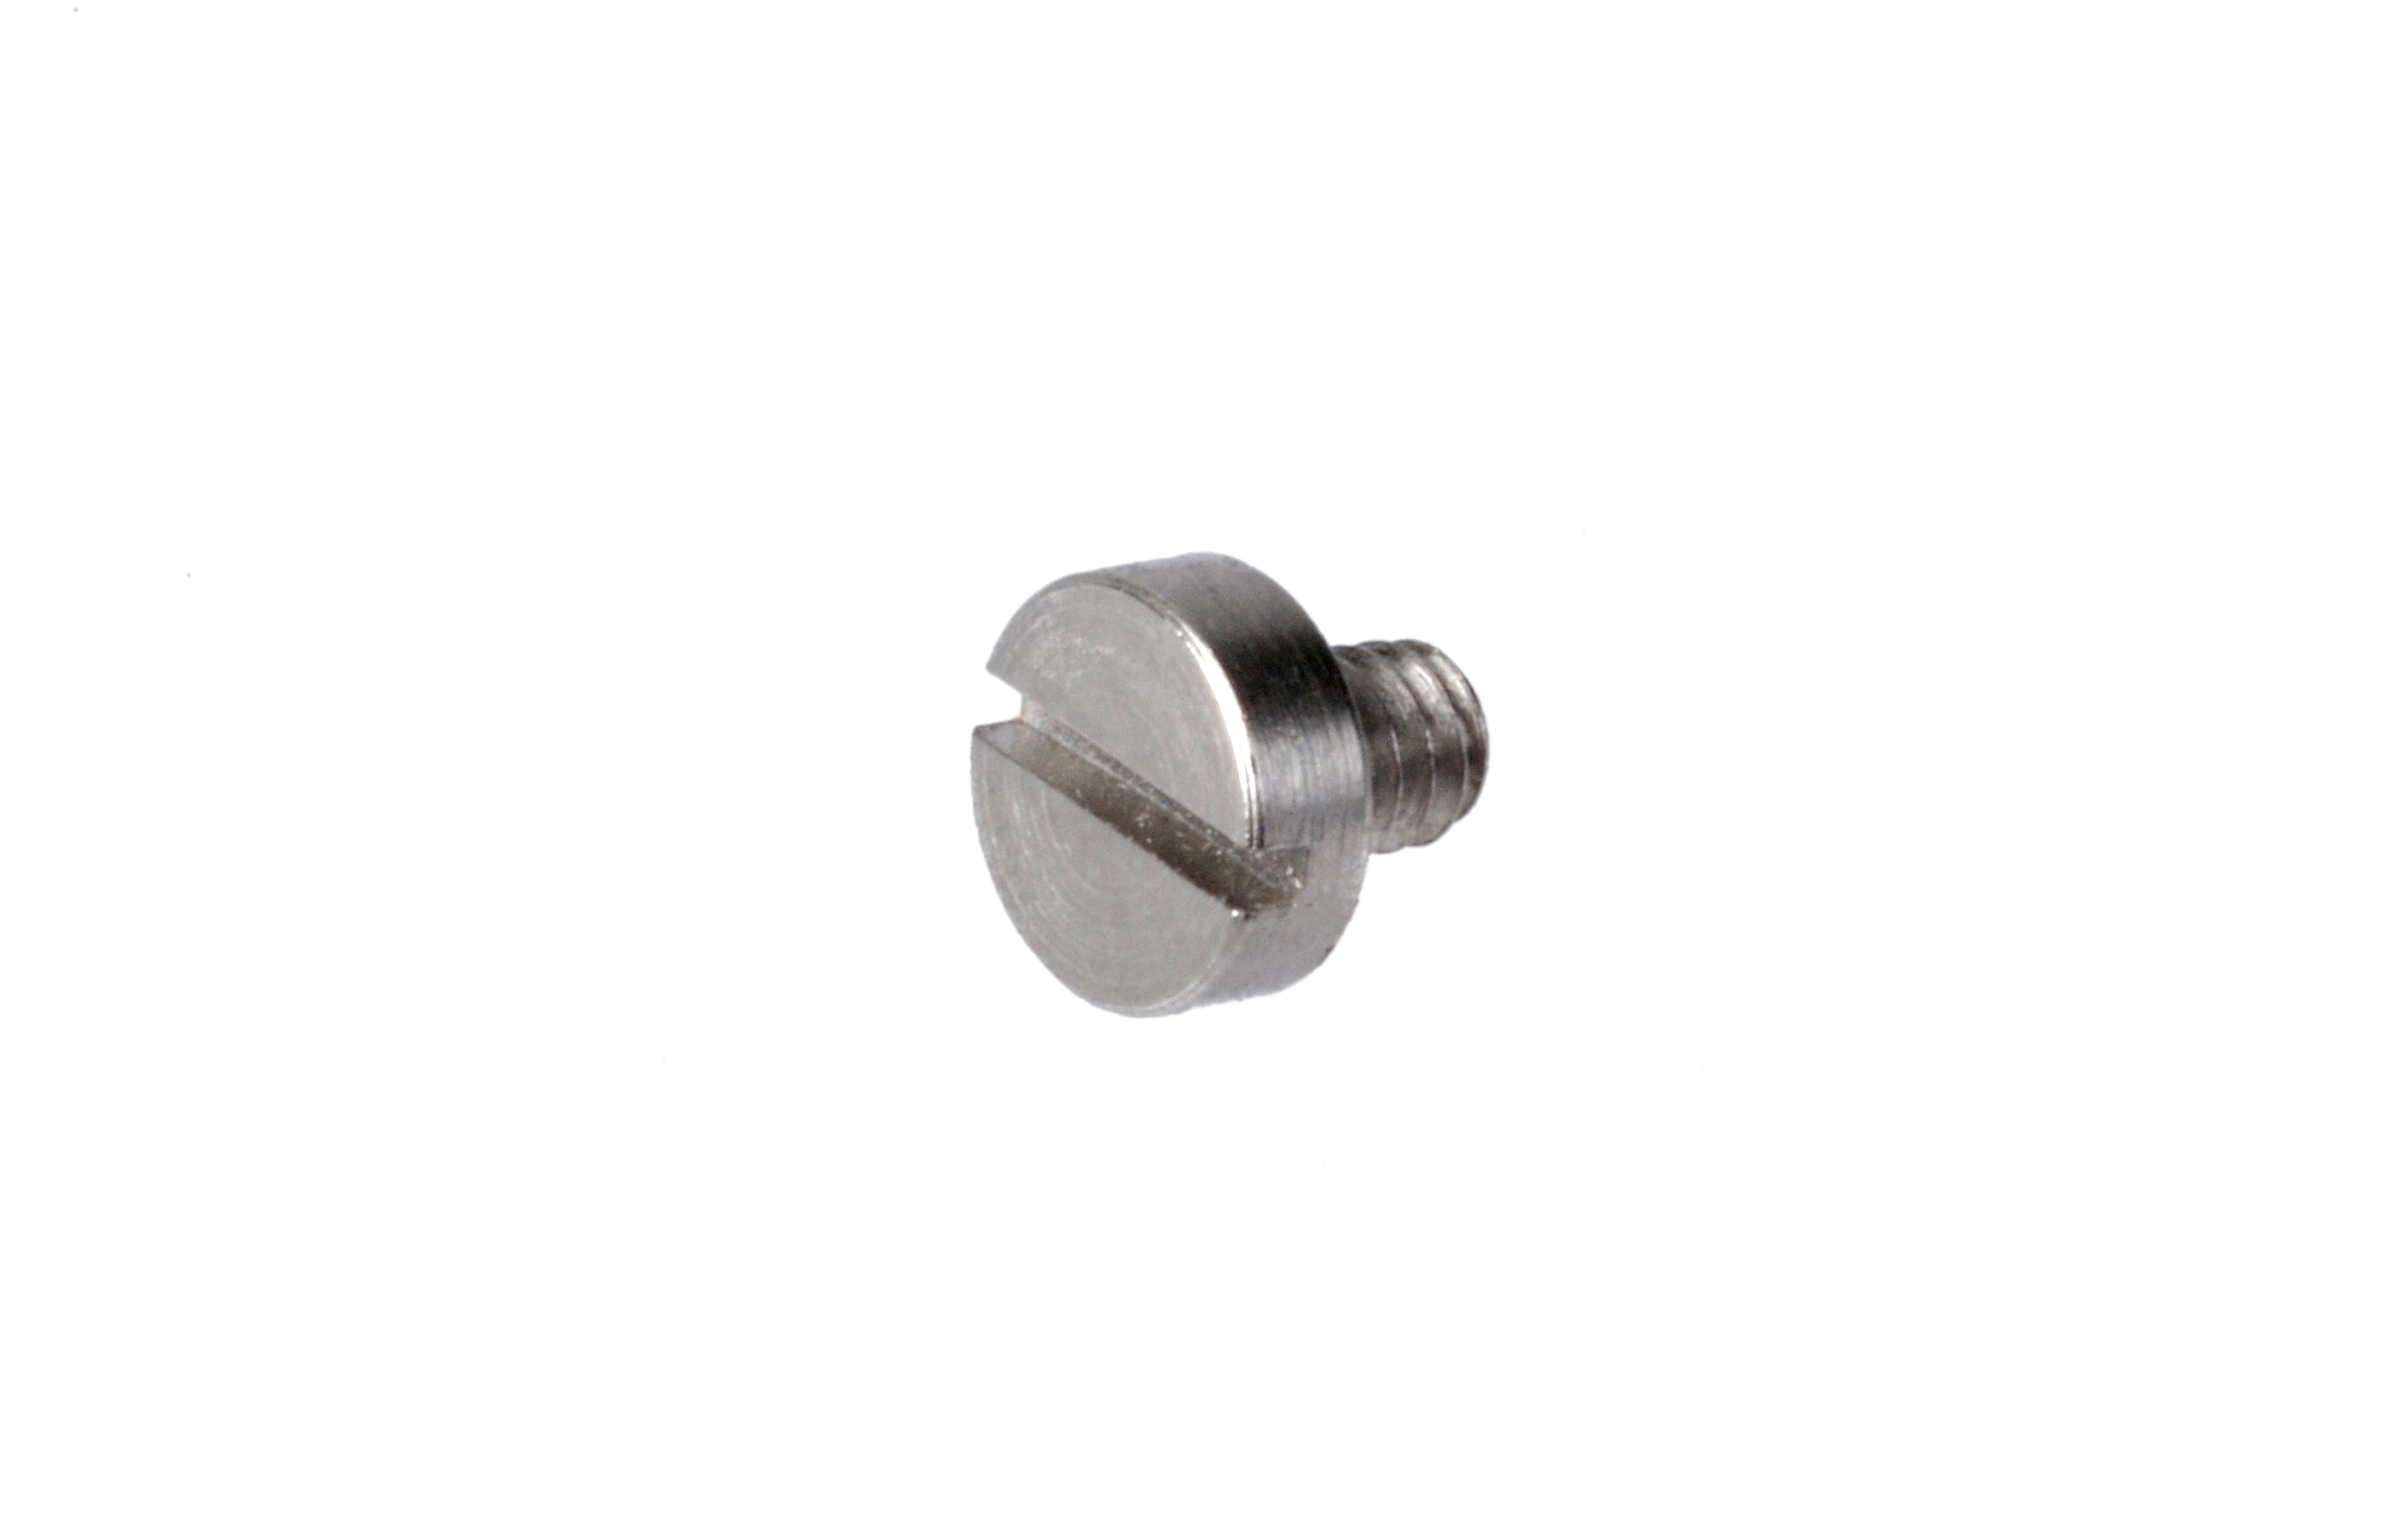 35.C M2 screw for ratchet cover